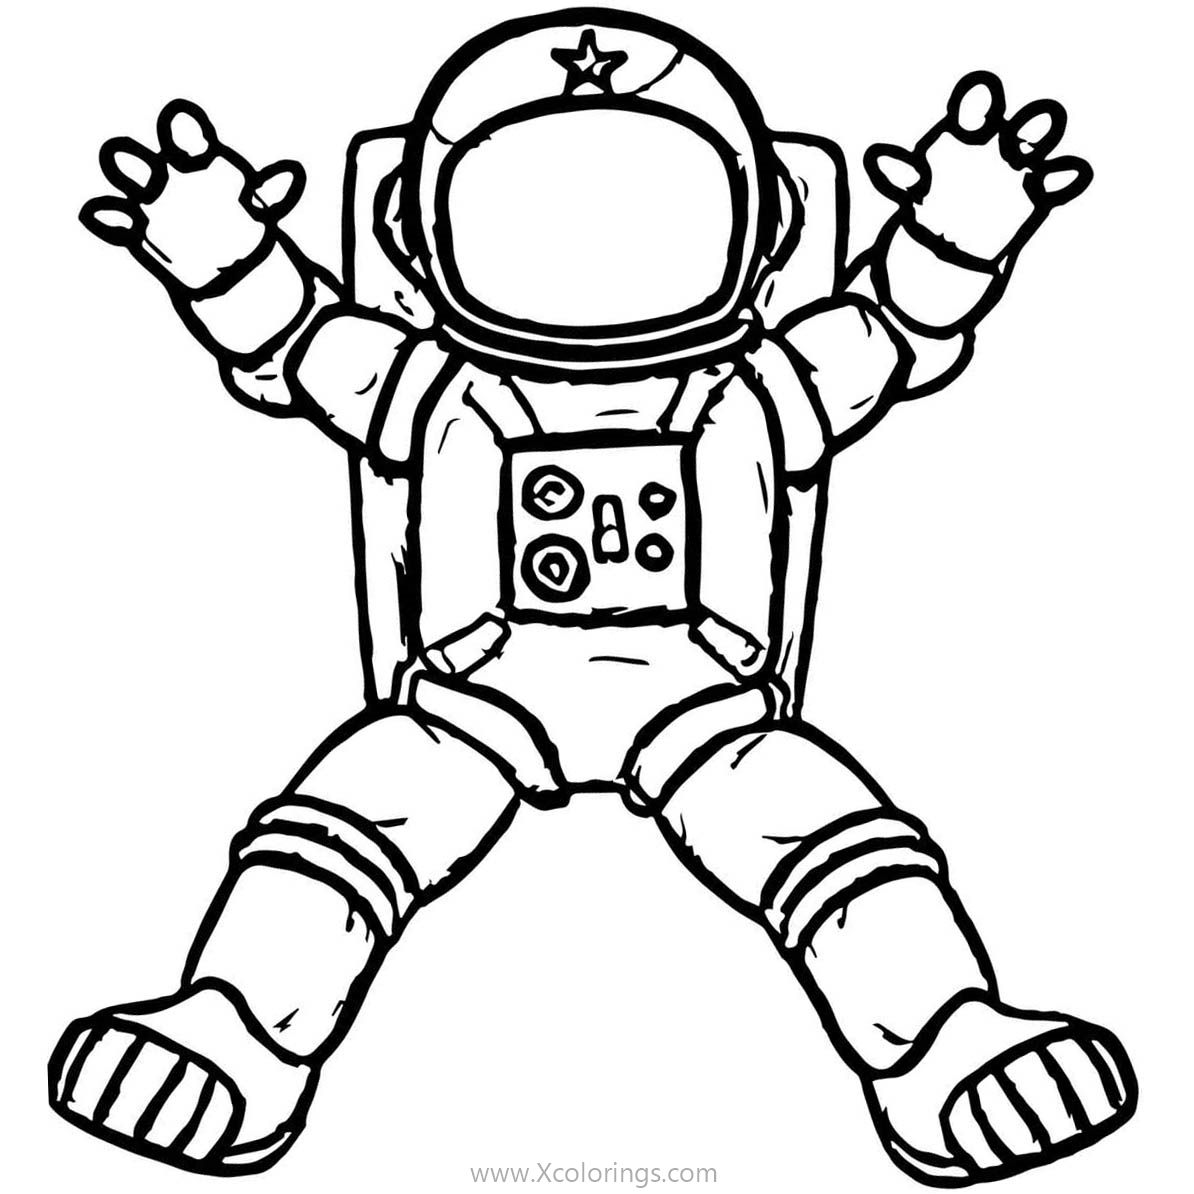 Free Astronaut Coloring Pages for 4 Years Old Children printable